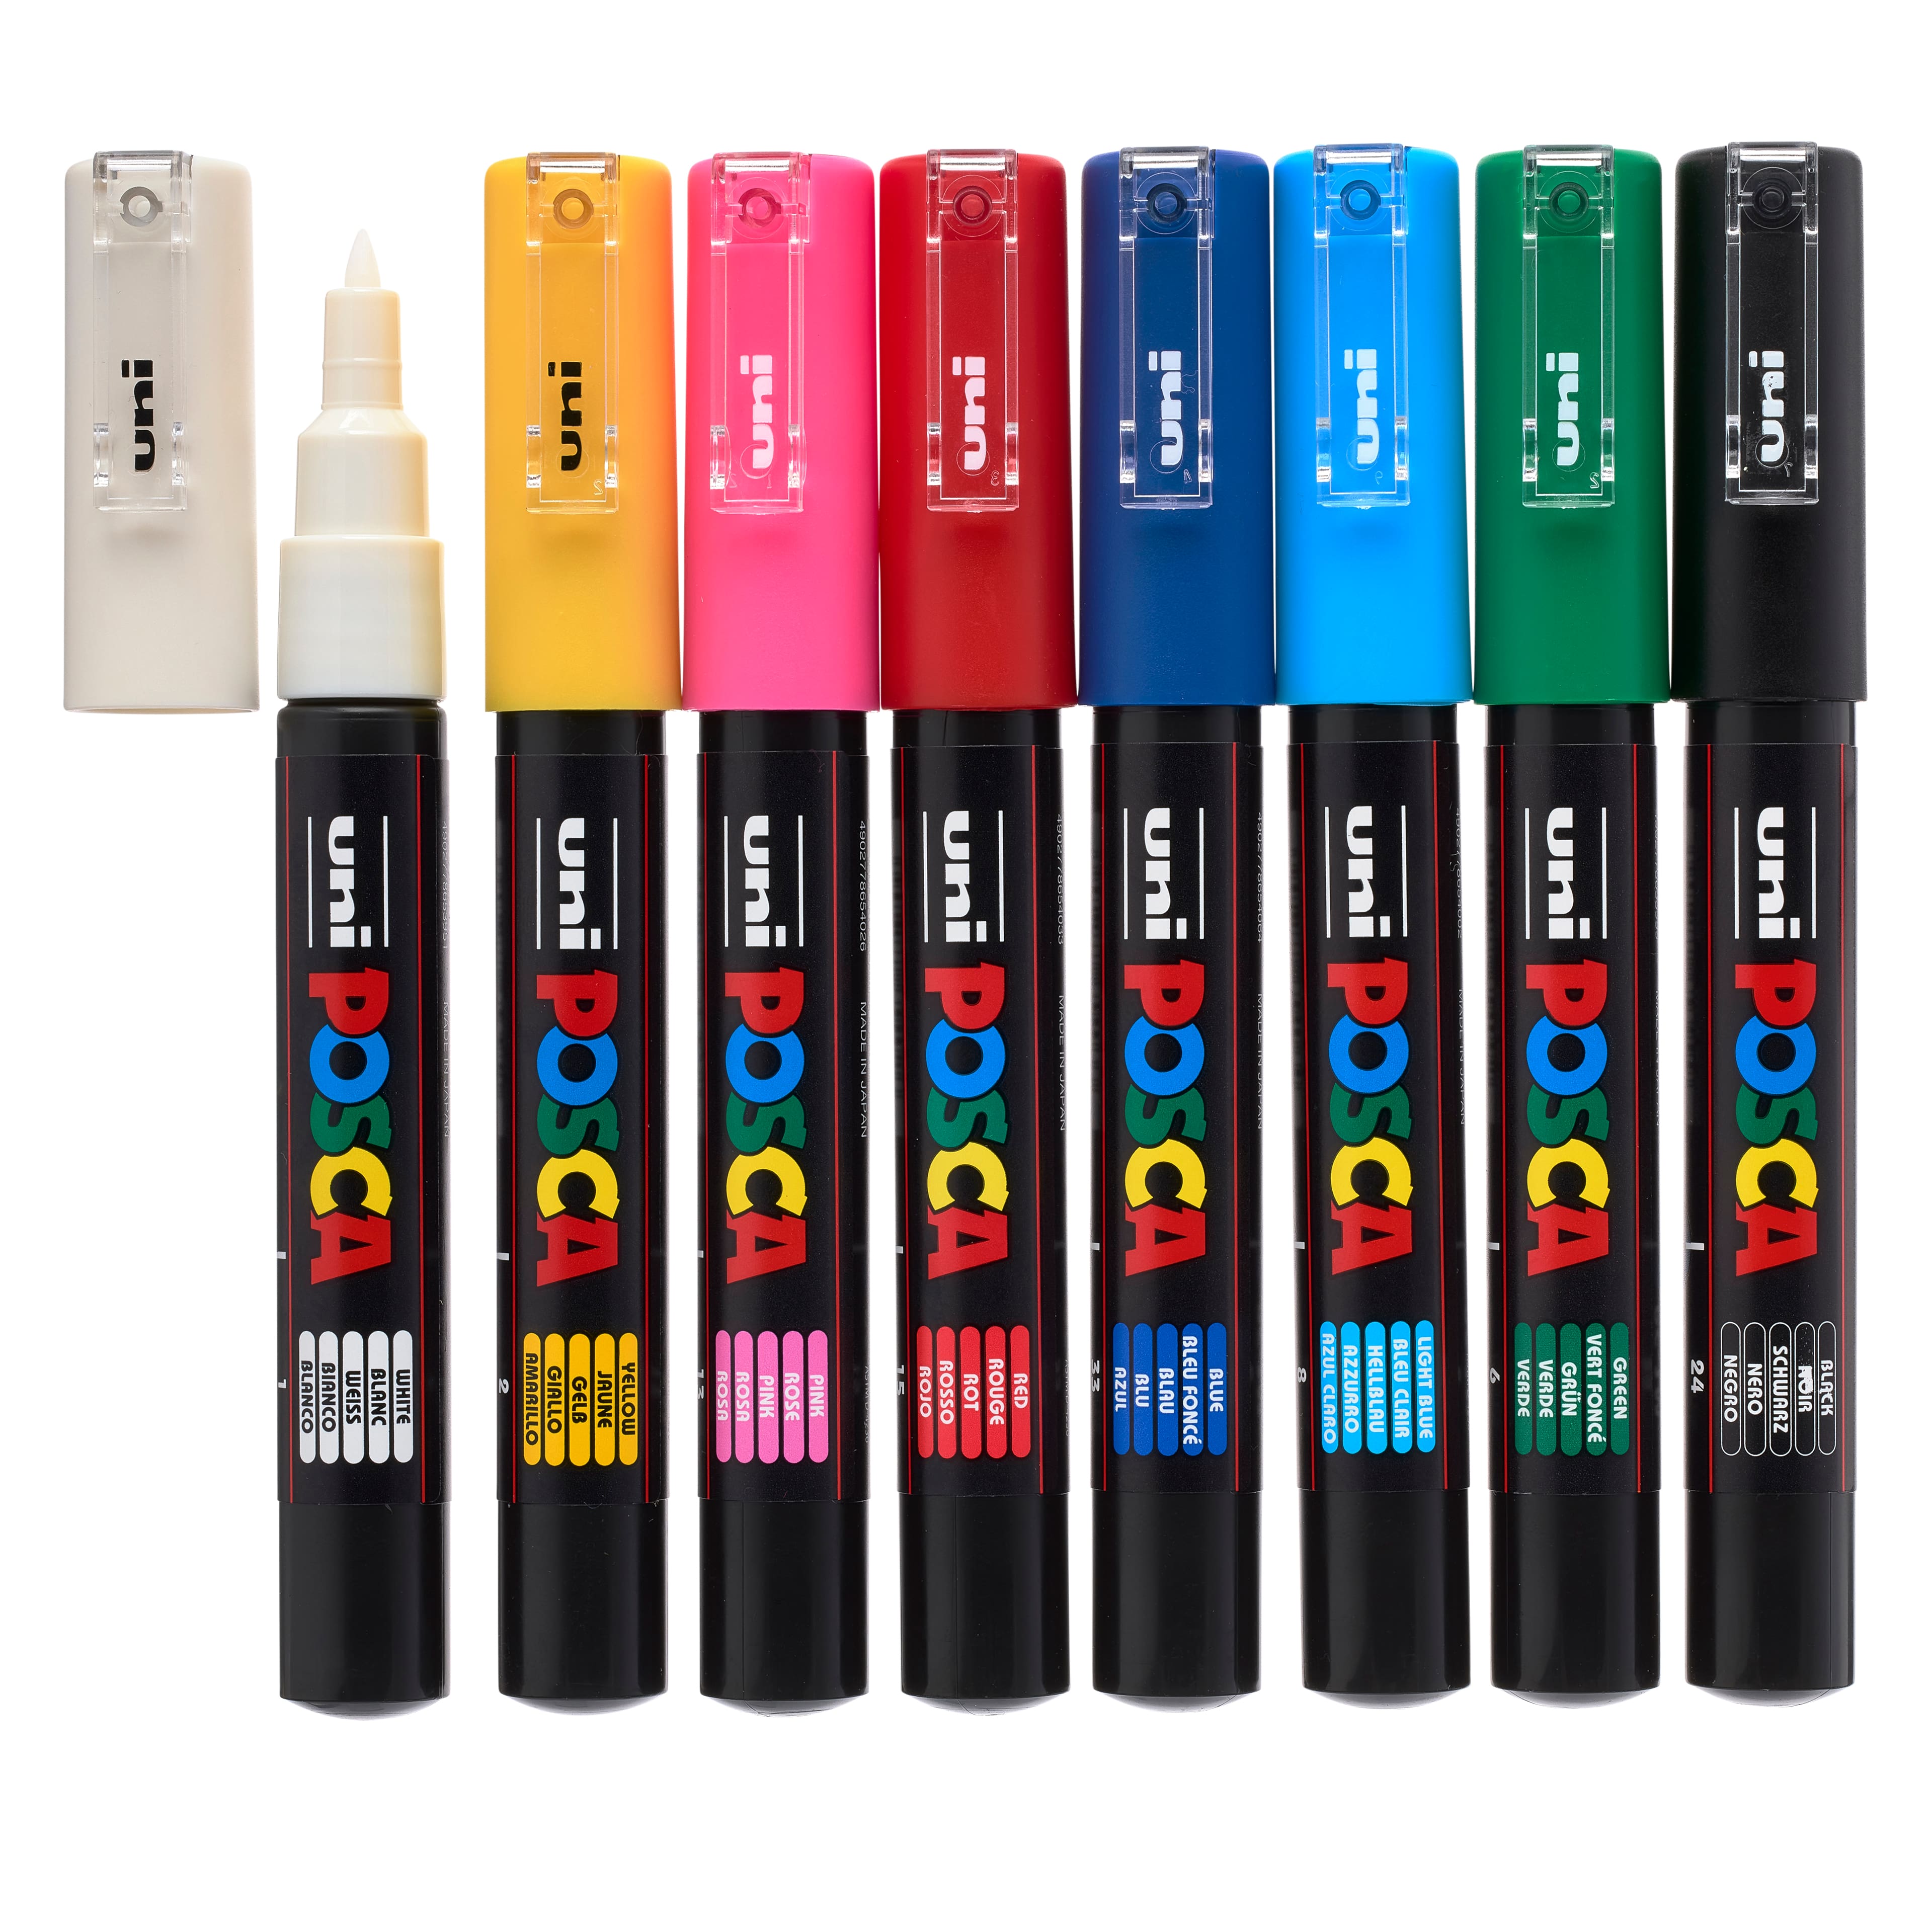 POSCA 8-Color Paint Pen Set, PC-1M, Extra-Fine Tapered Tip